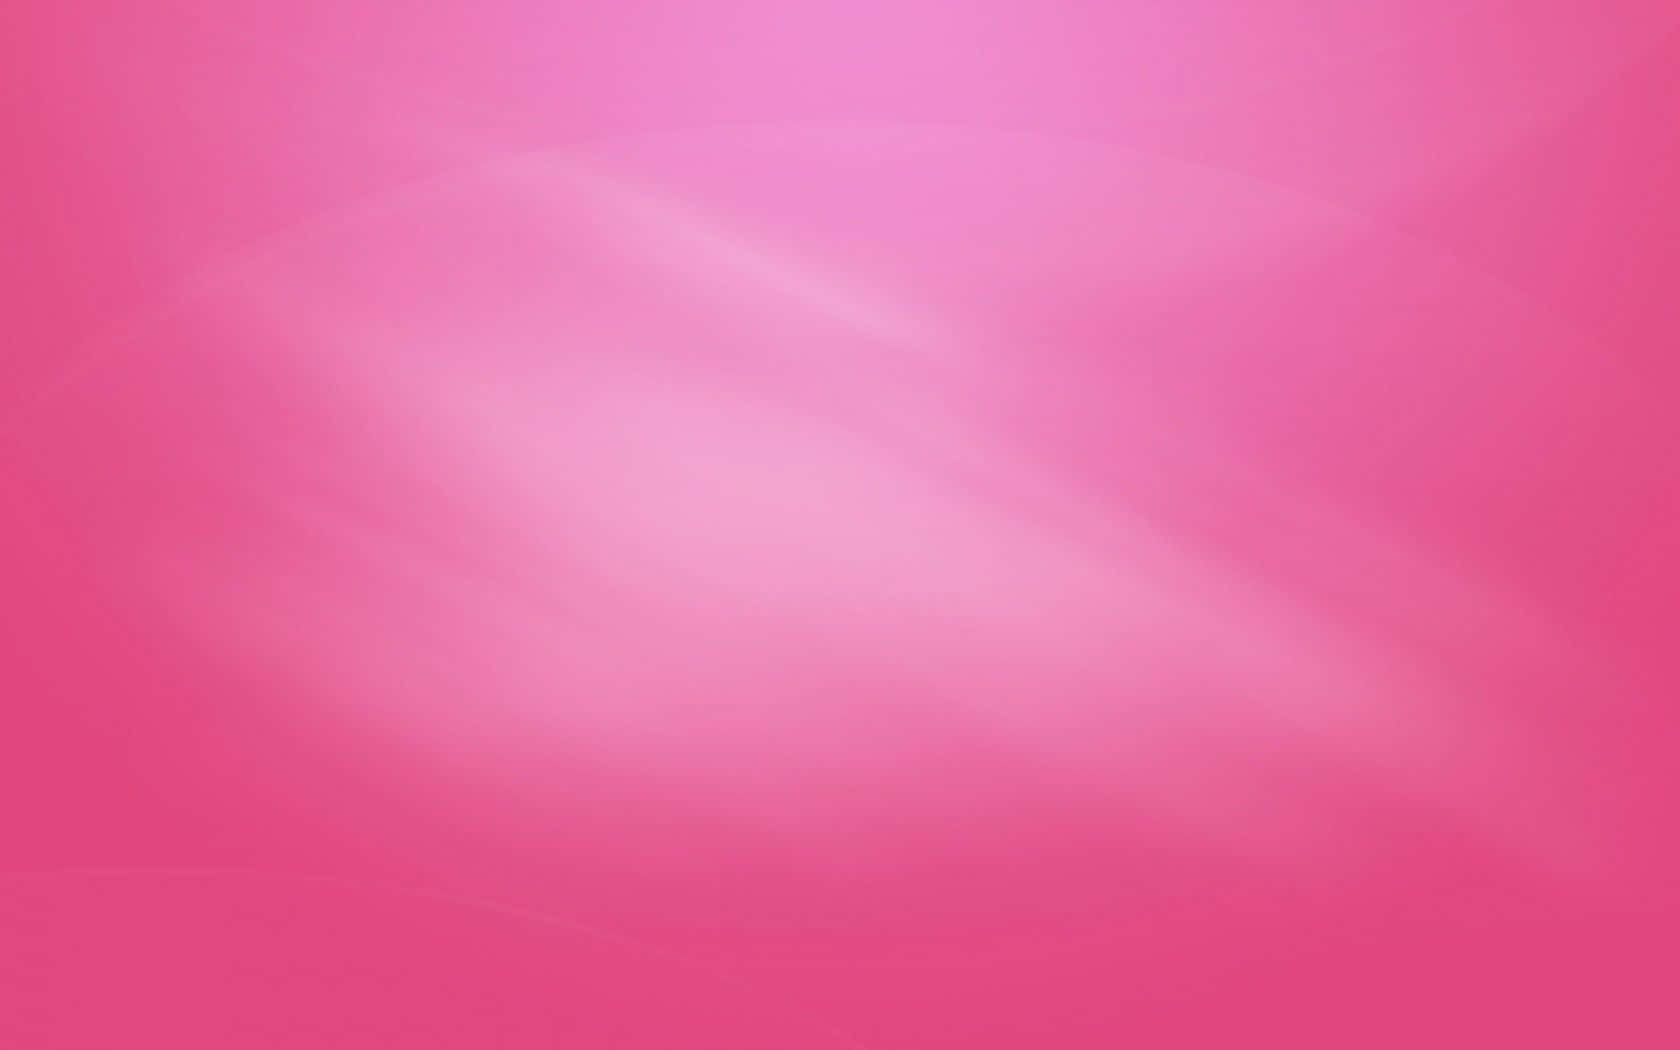 A stunningly cool pink background to brighten up any space.